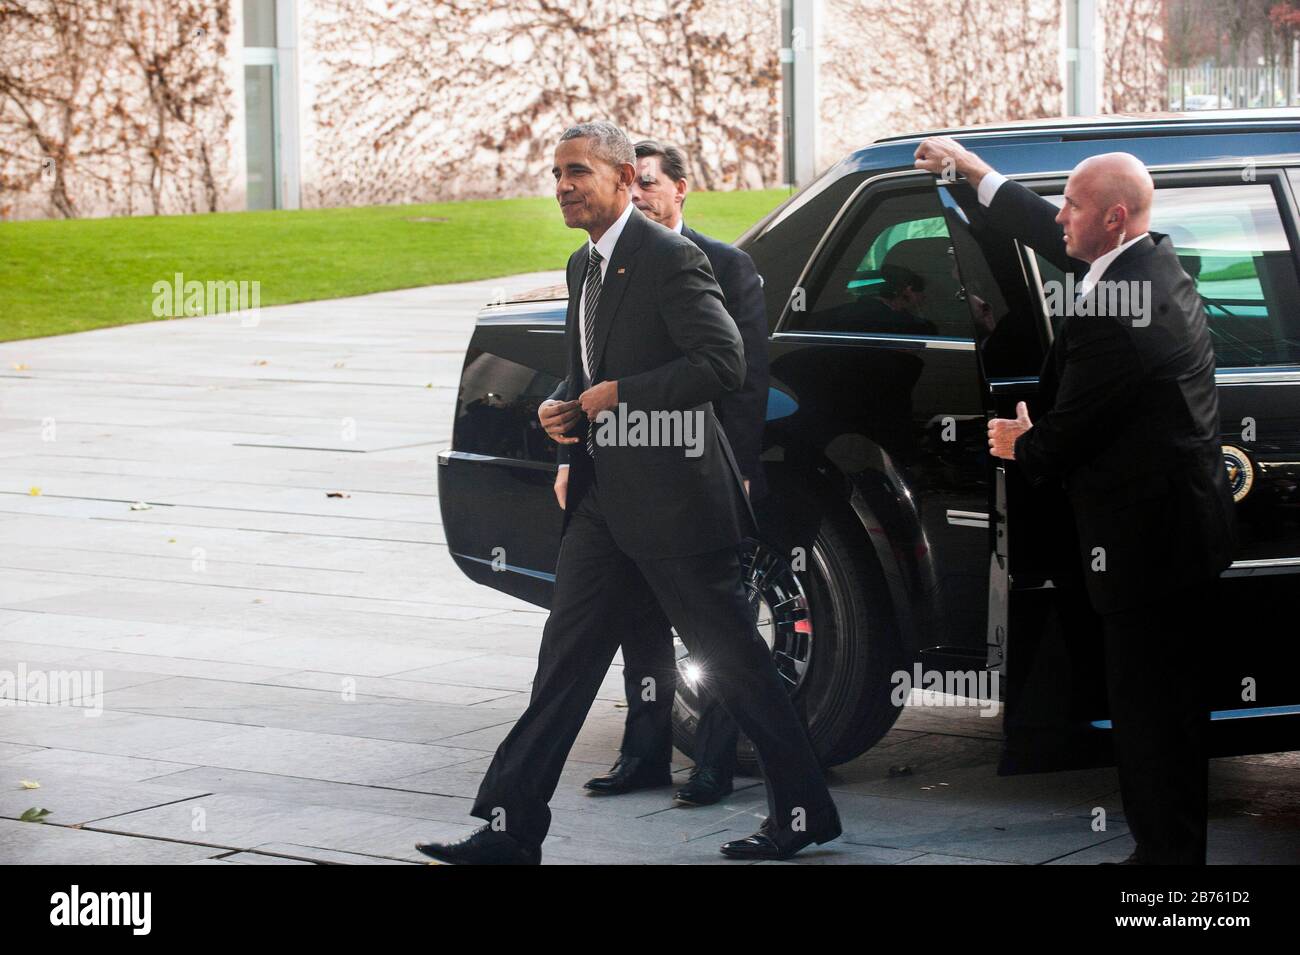 Germany, Berlin, 18.11.2016. Visit of Barack H. Obama, President of the United States of America to the Federal Chancellery in Berlin on 18.11.2016. Barack H. Obama, President of the United States of America. In the background: Obama's company car, "The Beast", visually a Cadillac, by weight a truck. Barack Obama's company car is expected to weigh between five and eight tons, the weight being carried by the frame of a pickup truck. [automated translation] Stock Photo